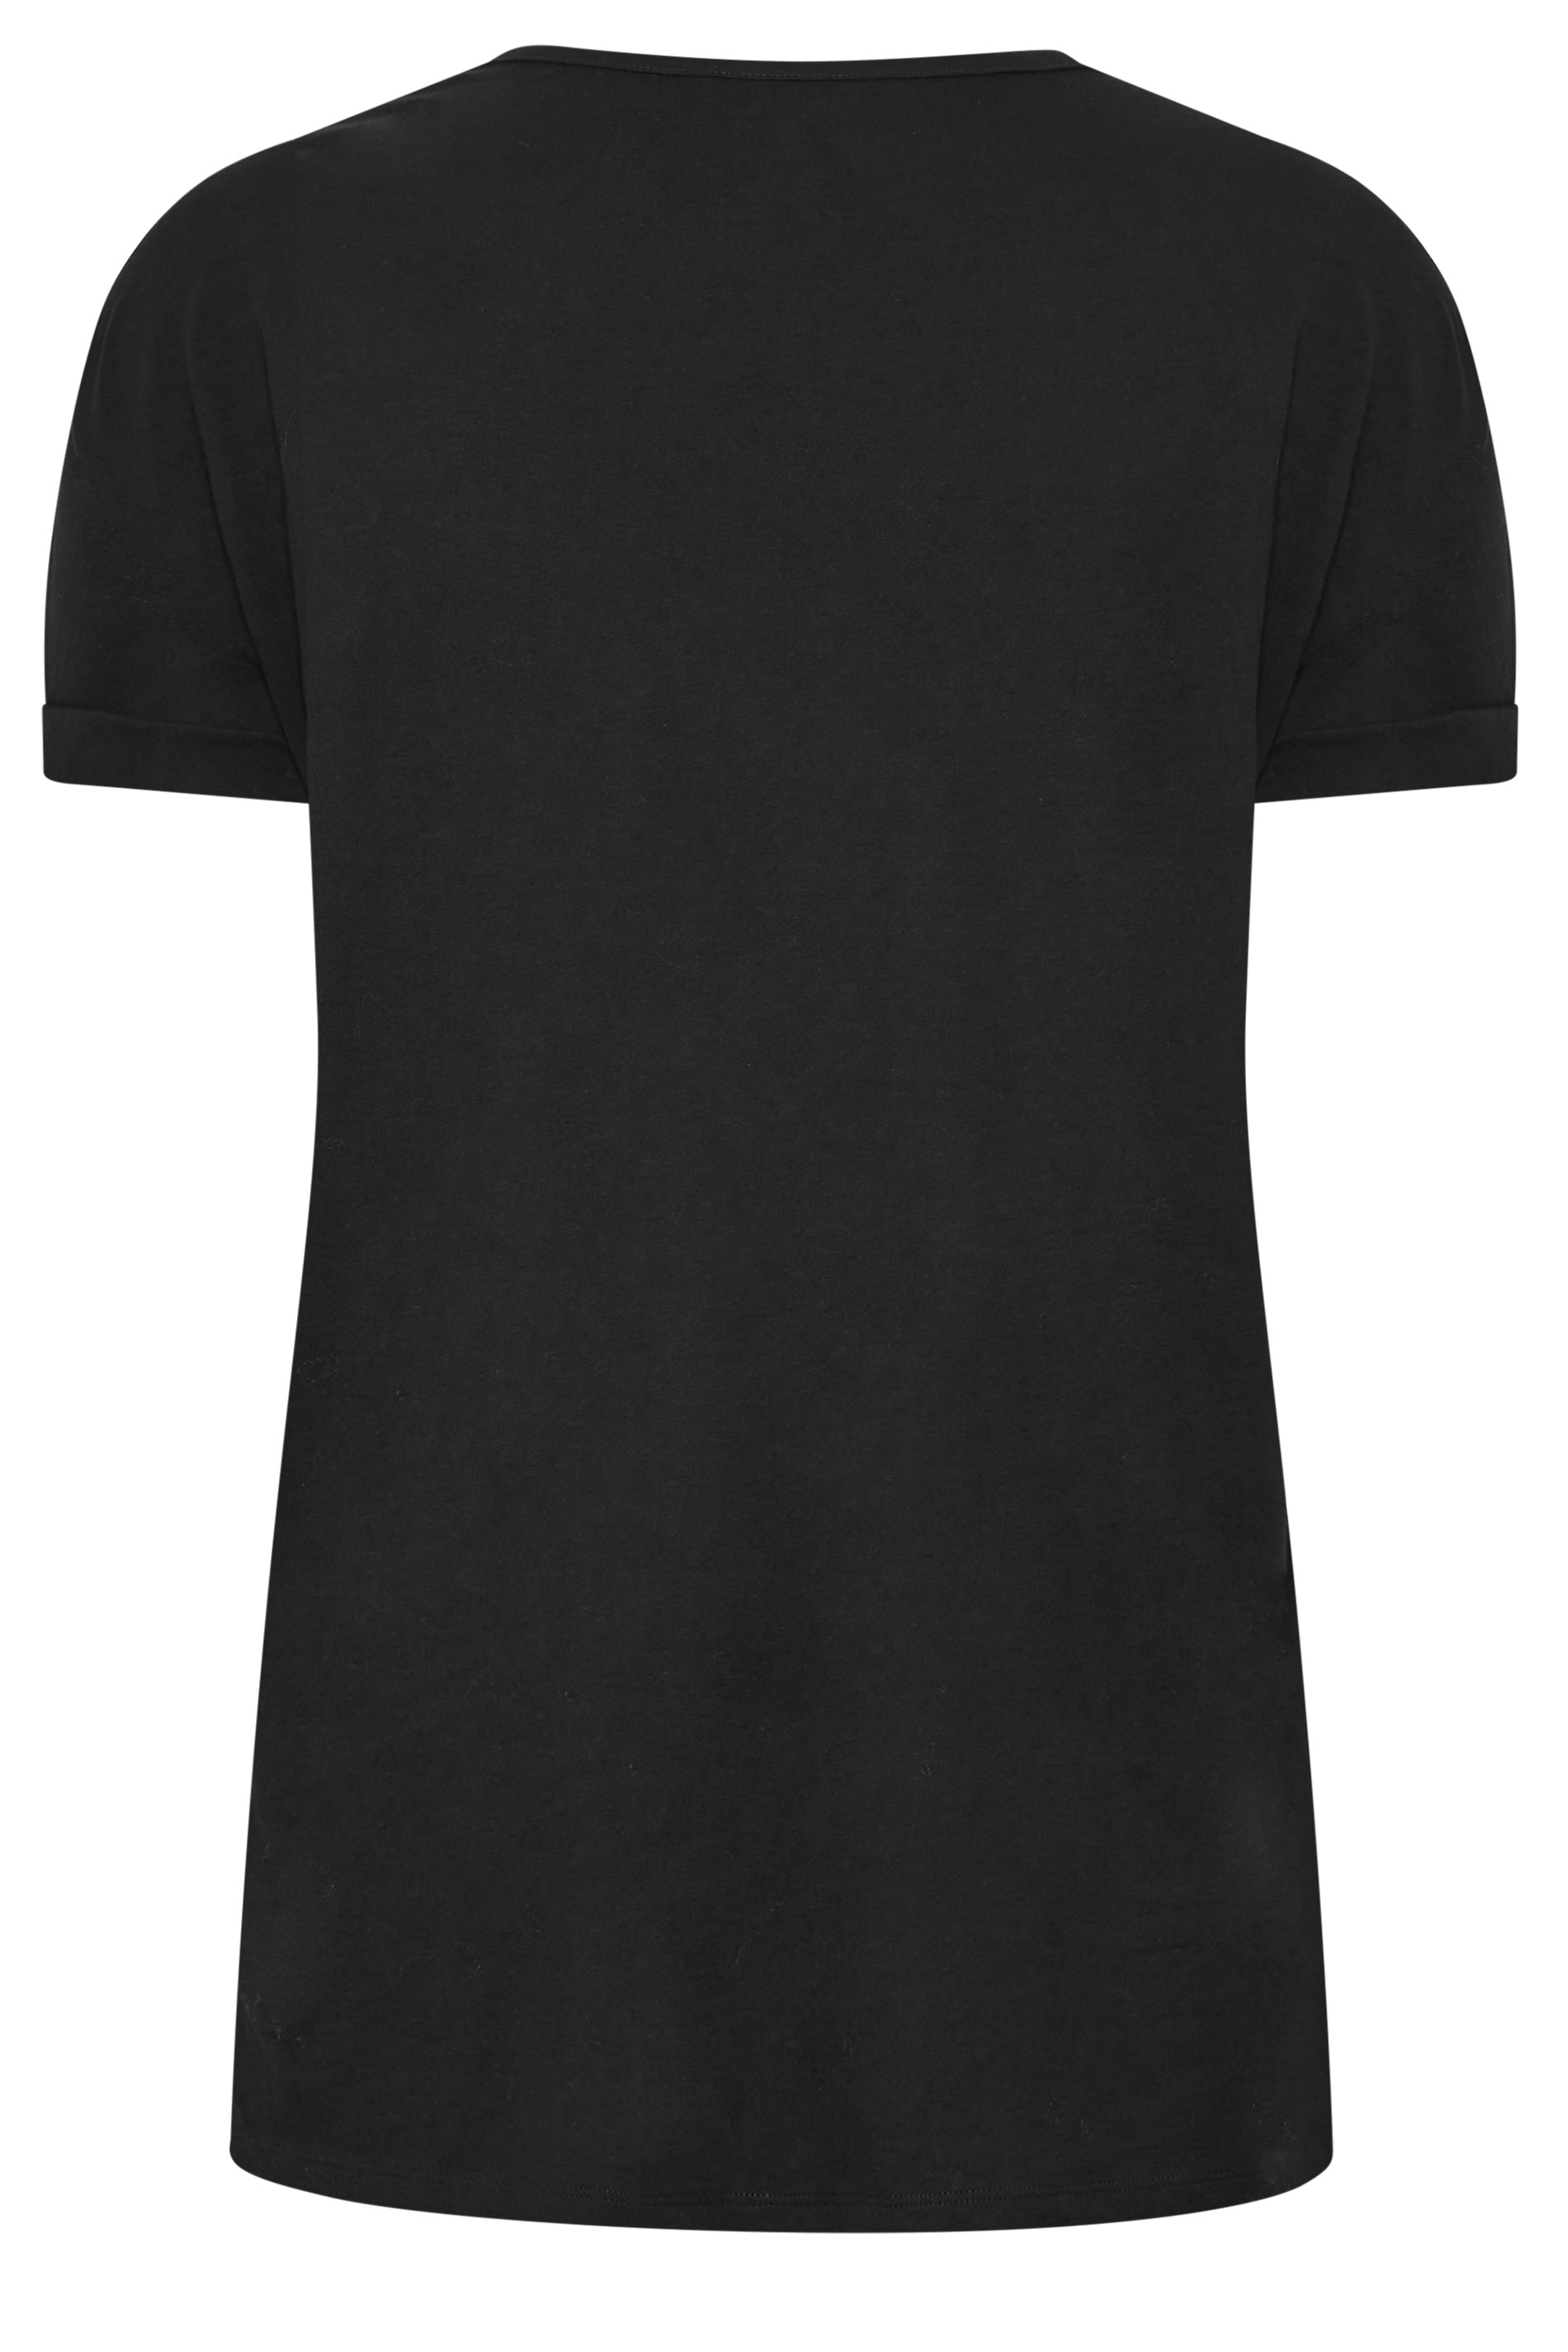 Yours Plus Size Black Cut Out T Shirt Yours Clothing 